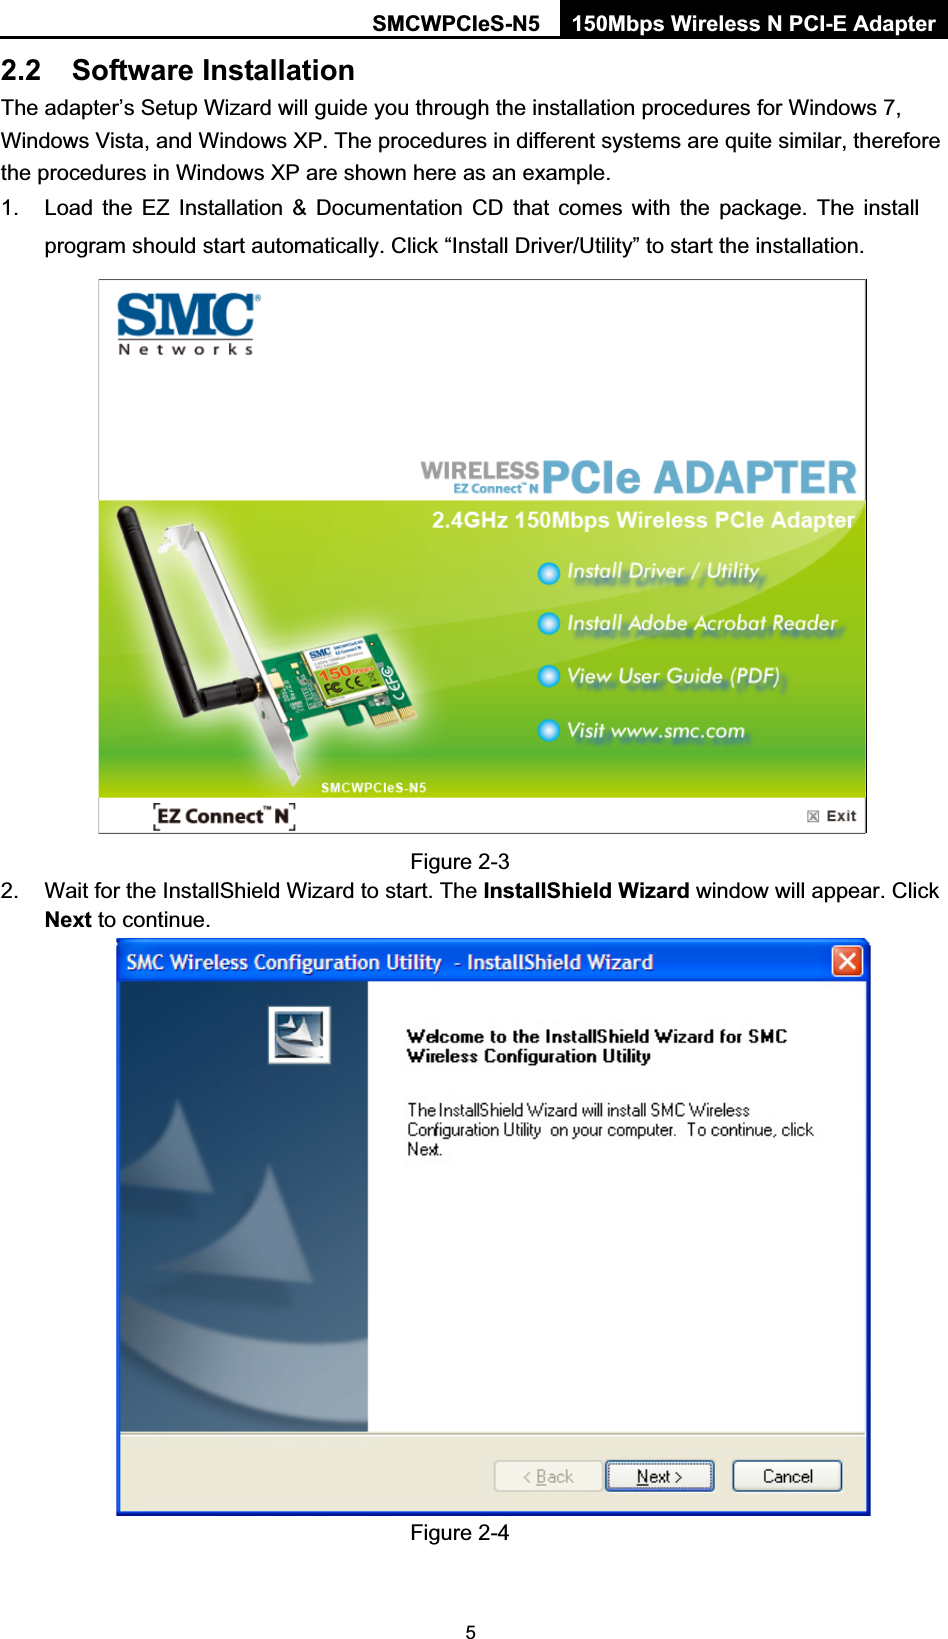 SMCWPCIeS-N5  150Mbps Wireless N PCI-E Adapter  52.2 Software Installation The adapter’s Setup Wizard will guide you through the installation procedures for Windows 7, Windows Vista, and Windows XP. The procedures in different systems are quite similar, therefore the procedures in Windows XP are shown here as an example.   1.  Load the EZ Installation &amp; Documentation CD that comes with the package. The install program should start automatically. Click “Install Driver/Utility” to start the installation.   Figure 2-3 2.  Wait for the InstallShield Wizard to start. The InstallShield Wizard window will appear. Click Next to continue.    Figure 2-4 